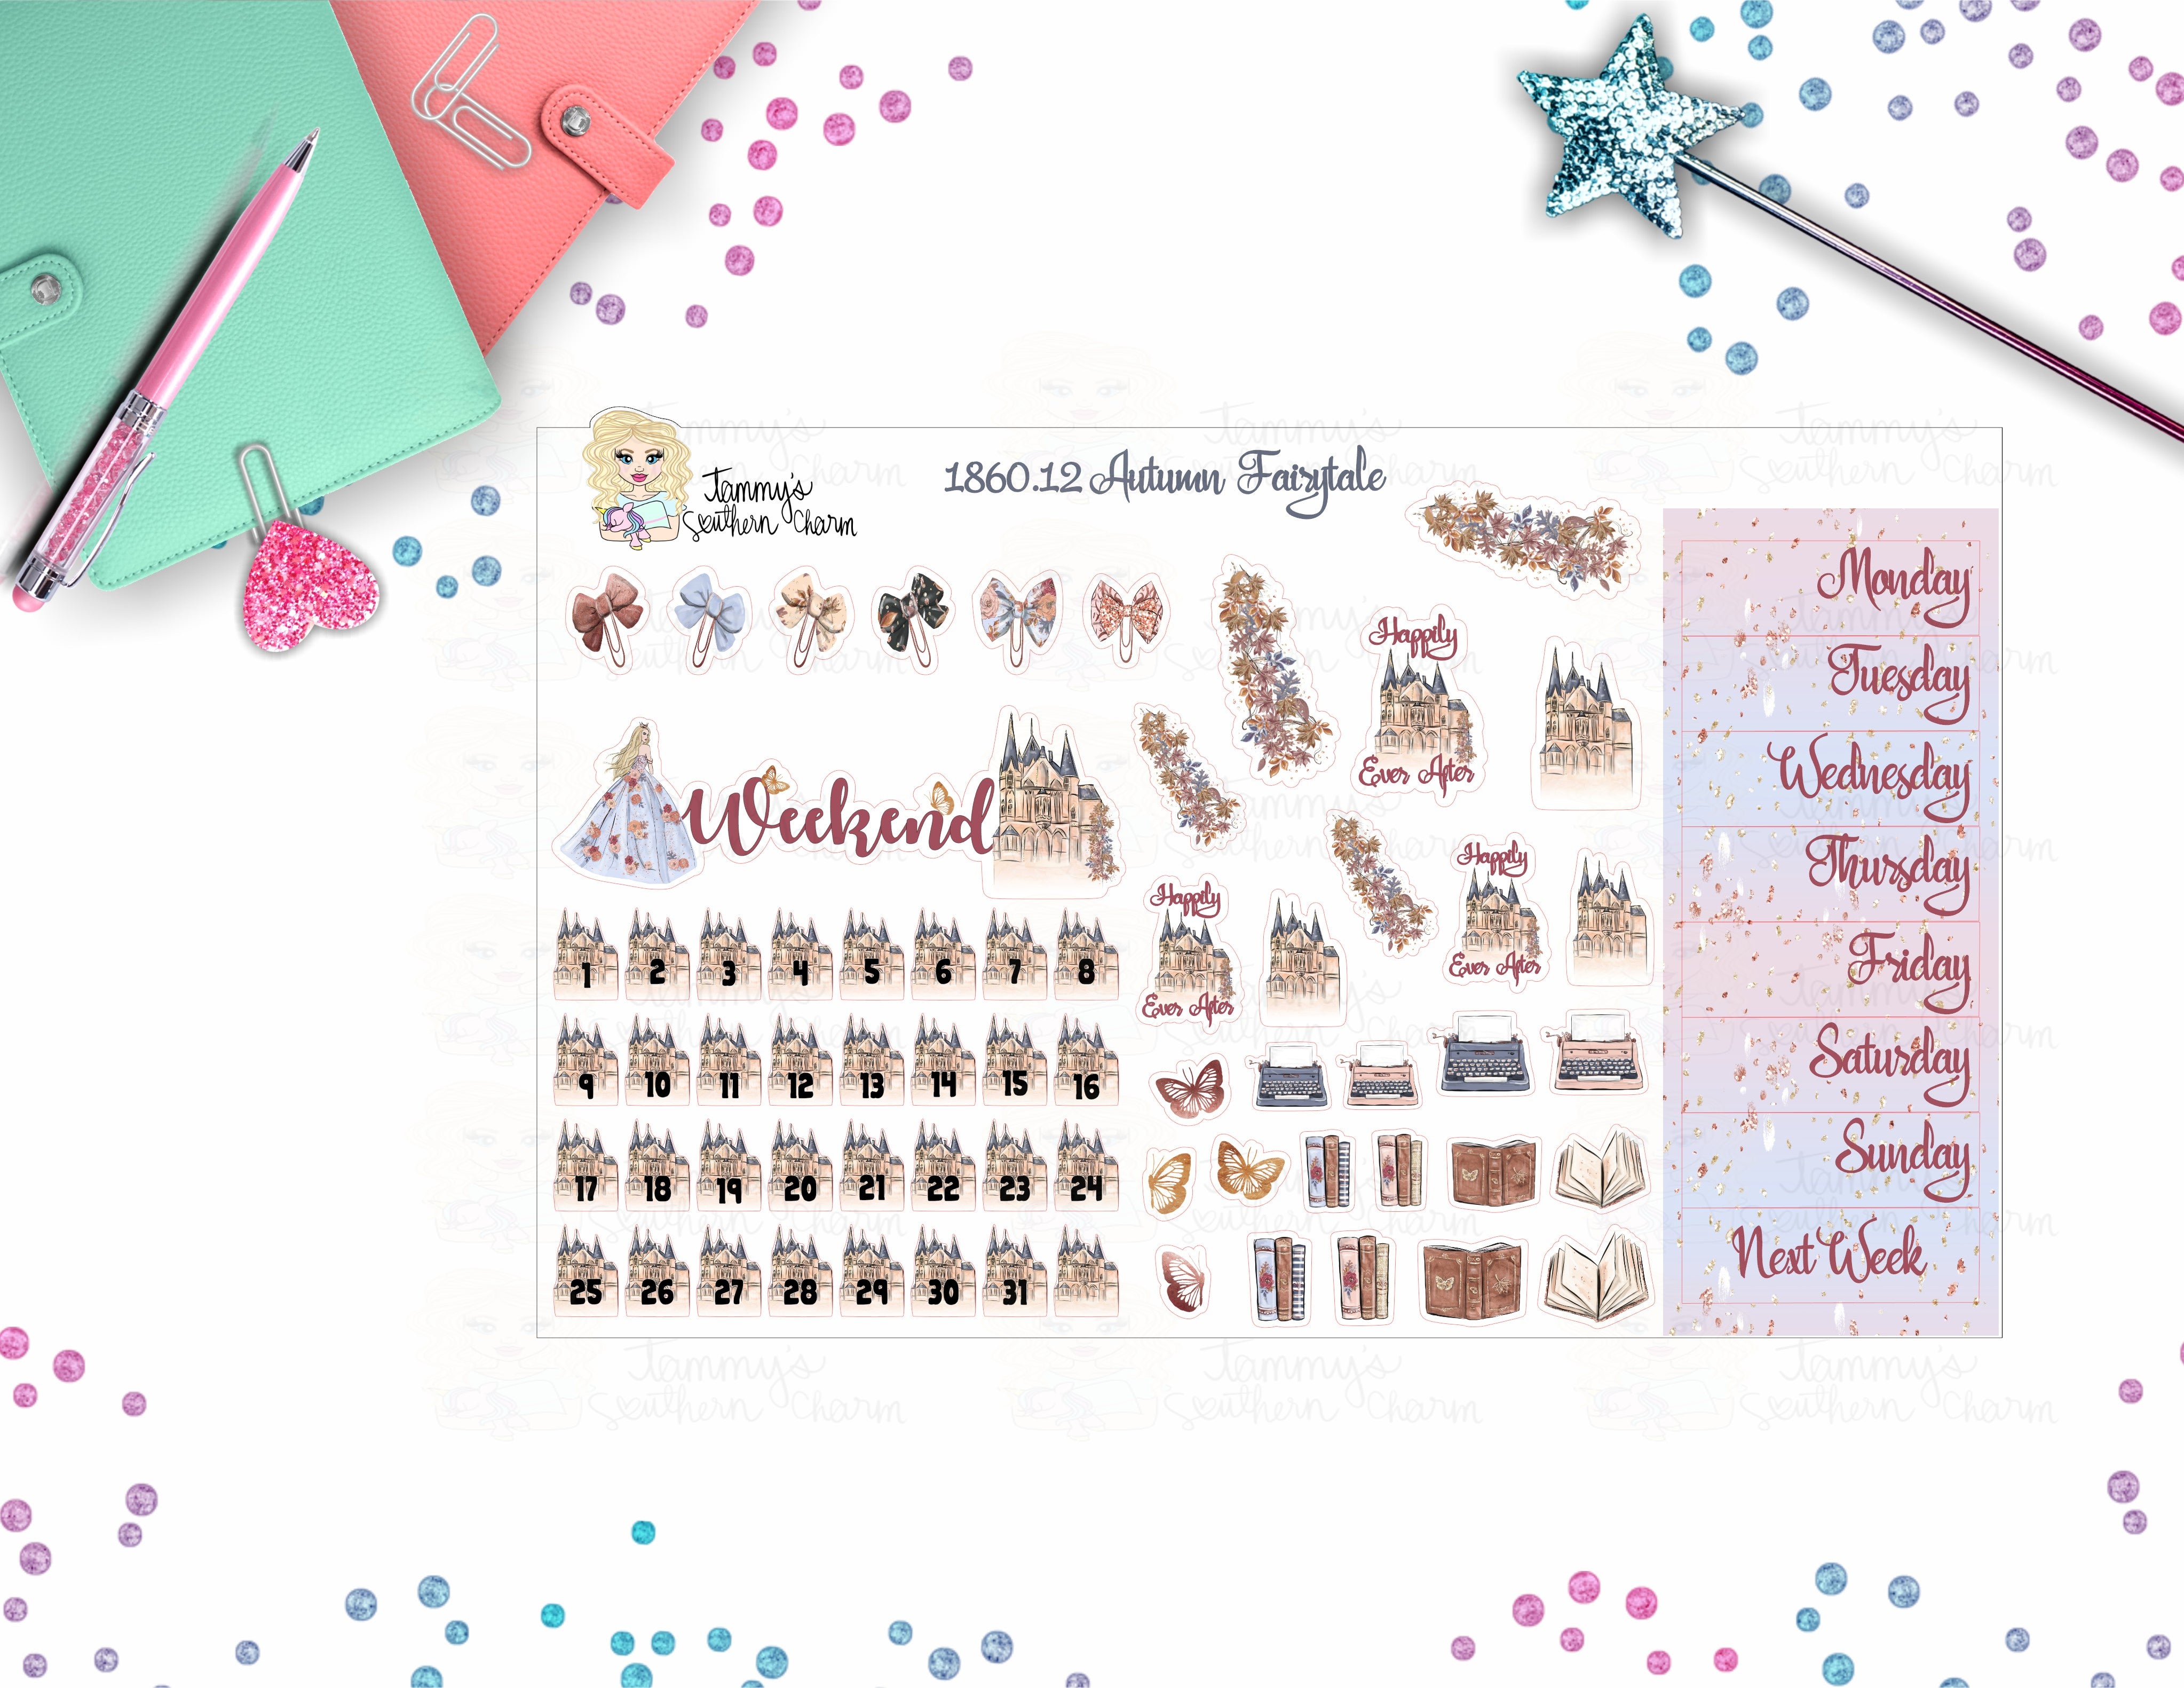 1860.12 - AUTUMN FAIRY TALE - WEEKEND BANNER, DATE COVERS, BOW PAPERCLIP STICKERS, DECO STICKERS, ETC.  6 BOW PAPERCLIP STICKERS 1 WEEKEND BANNER 8 DAY COVERS 31 DATE COVERS, 1 BLANK 26 VARIOUS DECO STICKERS SHEET SIZE:  W: 7.500 IN X H: 4.600 IN